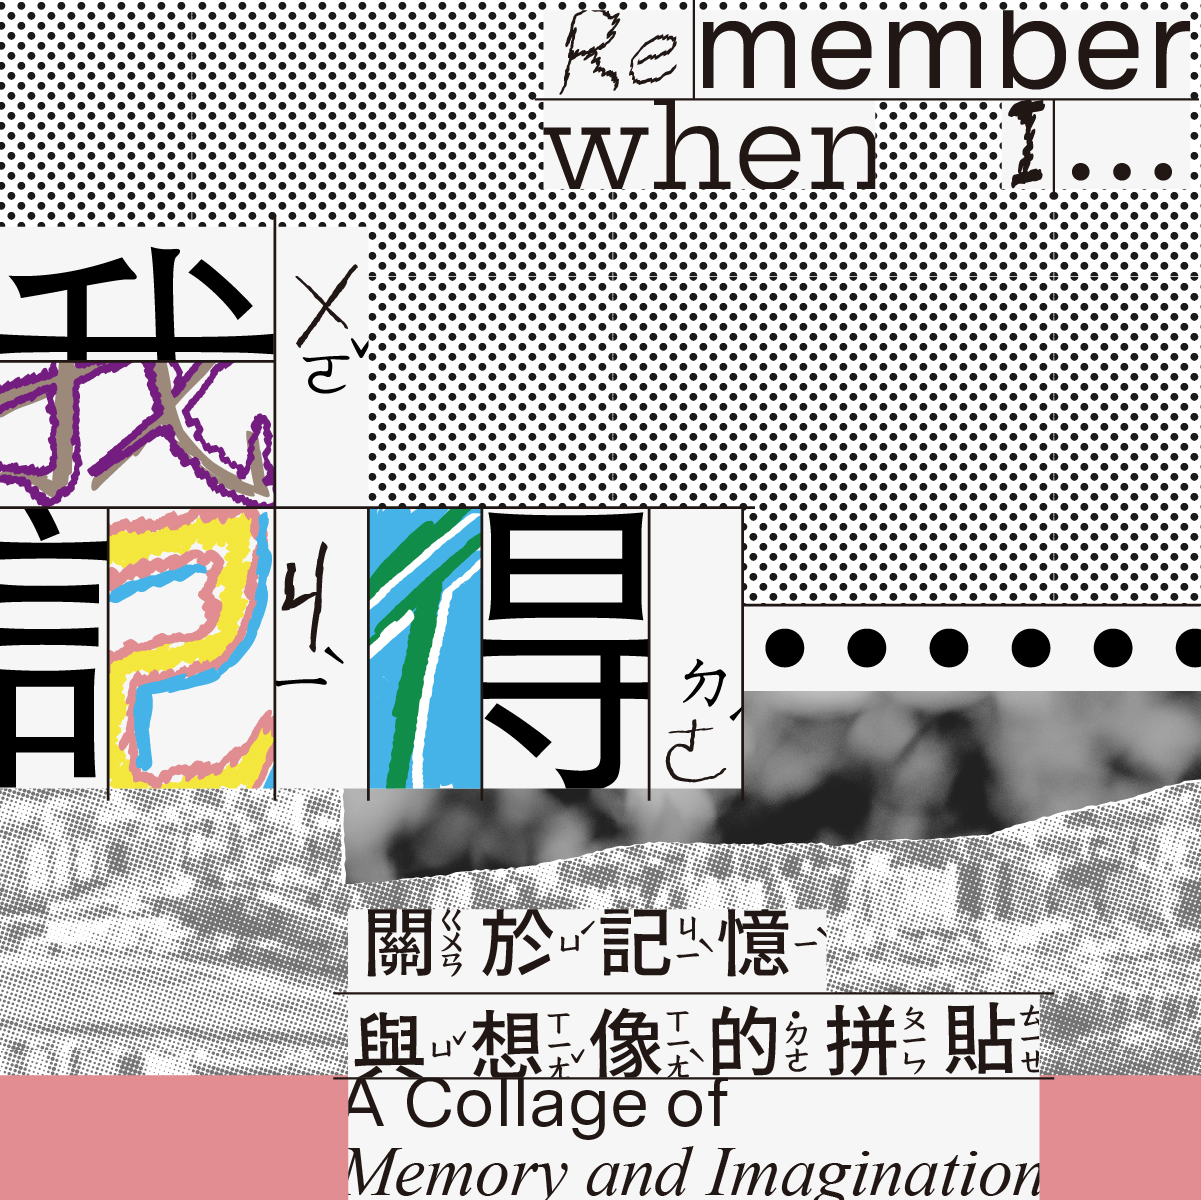 “Remember When I...”: A Collage of Memory and Imagination                                                                                                                                               